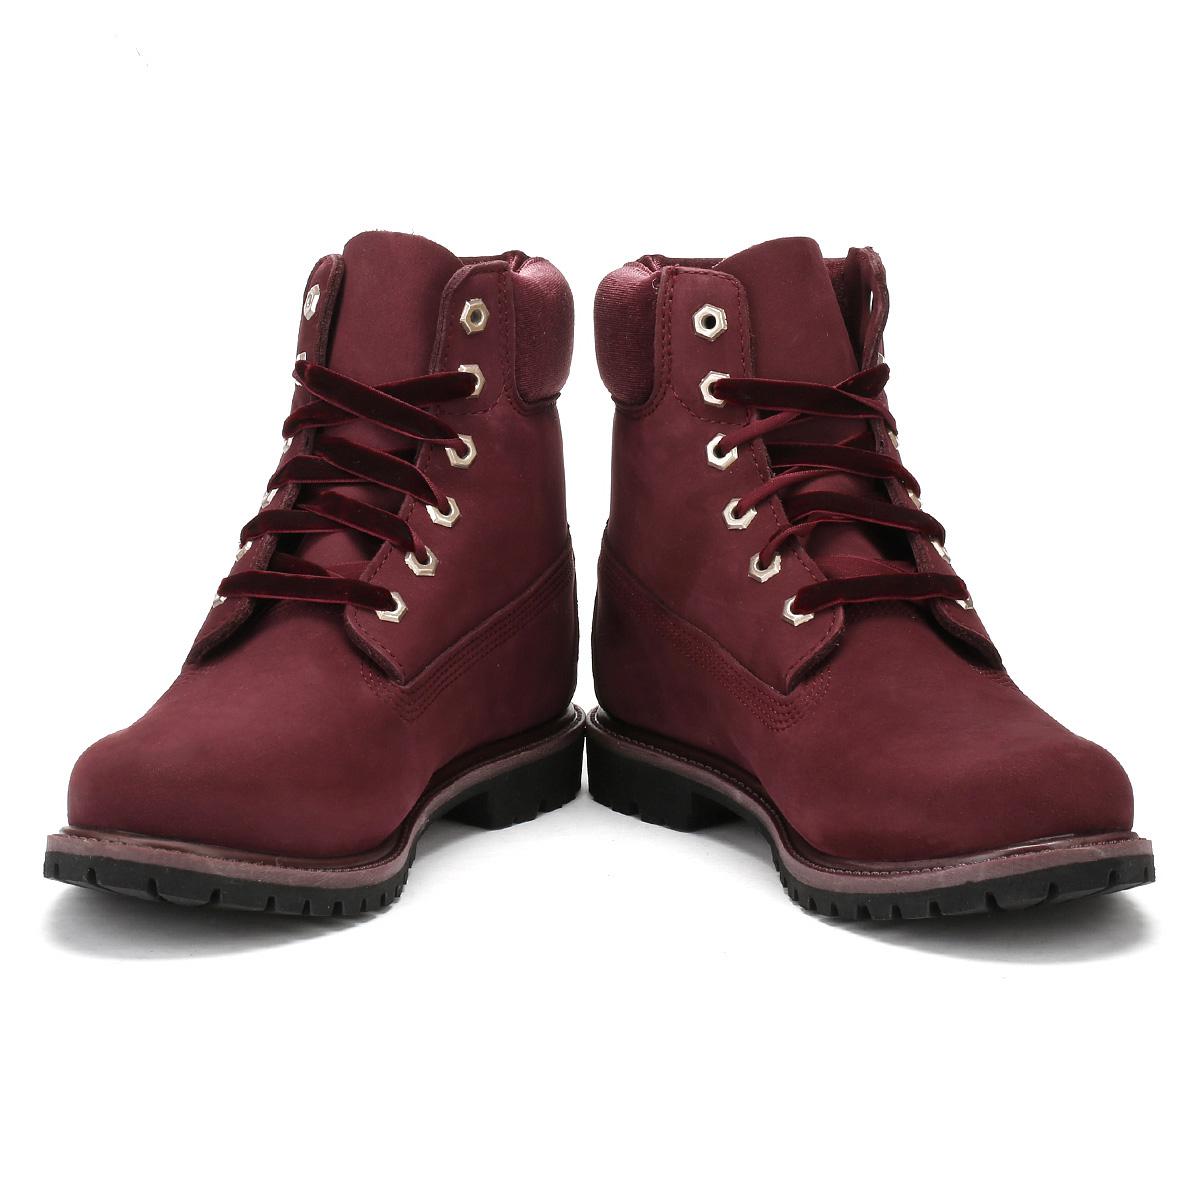 Lyst - Timberland Womens Jewels Pack Red Port 6 Inch Boots in Red